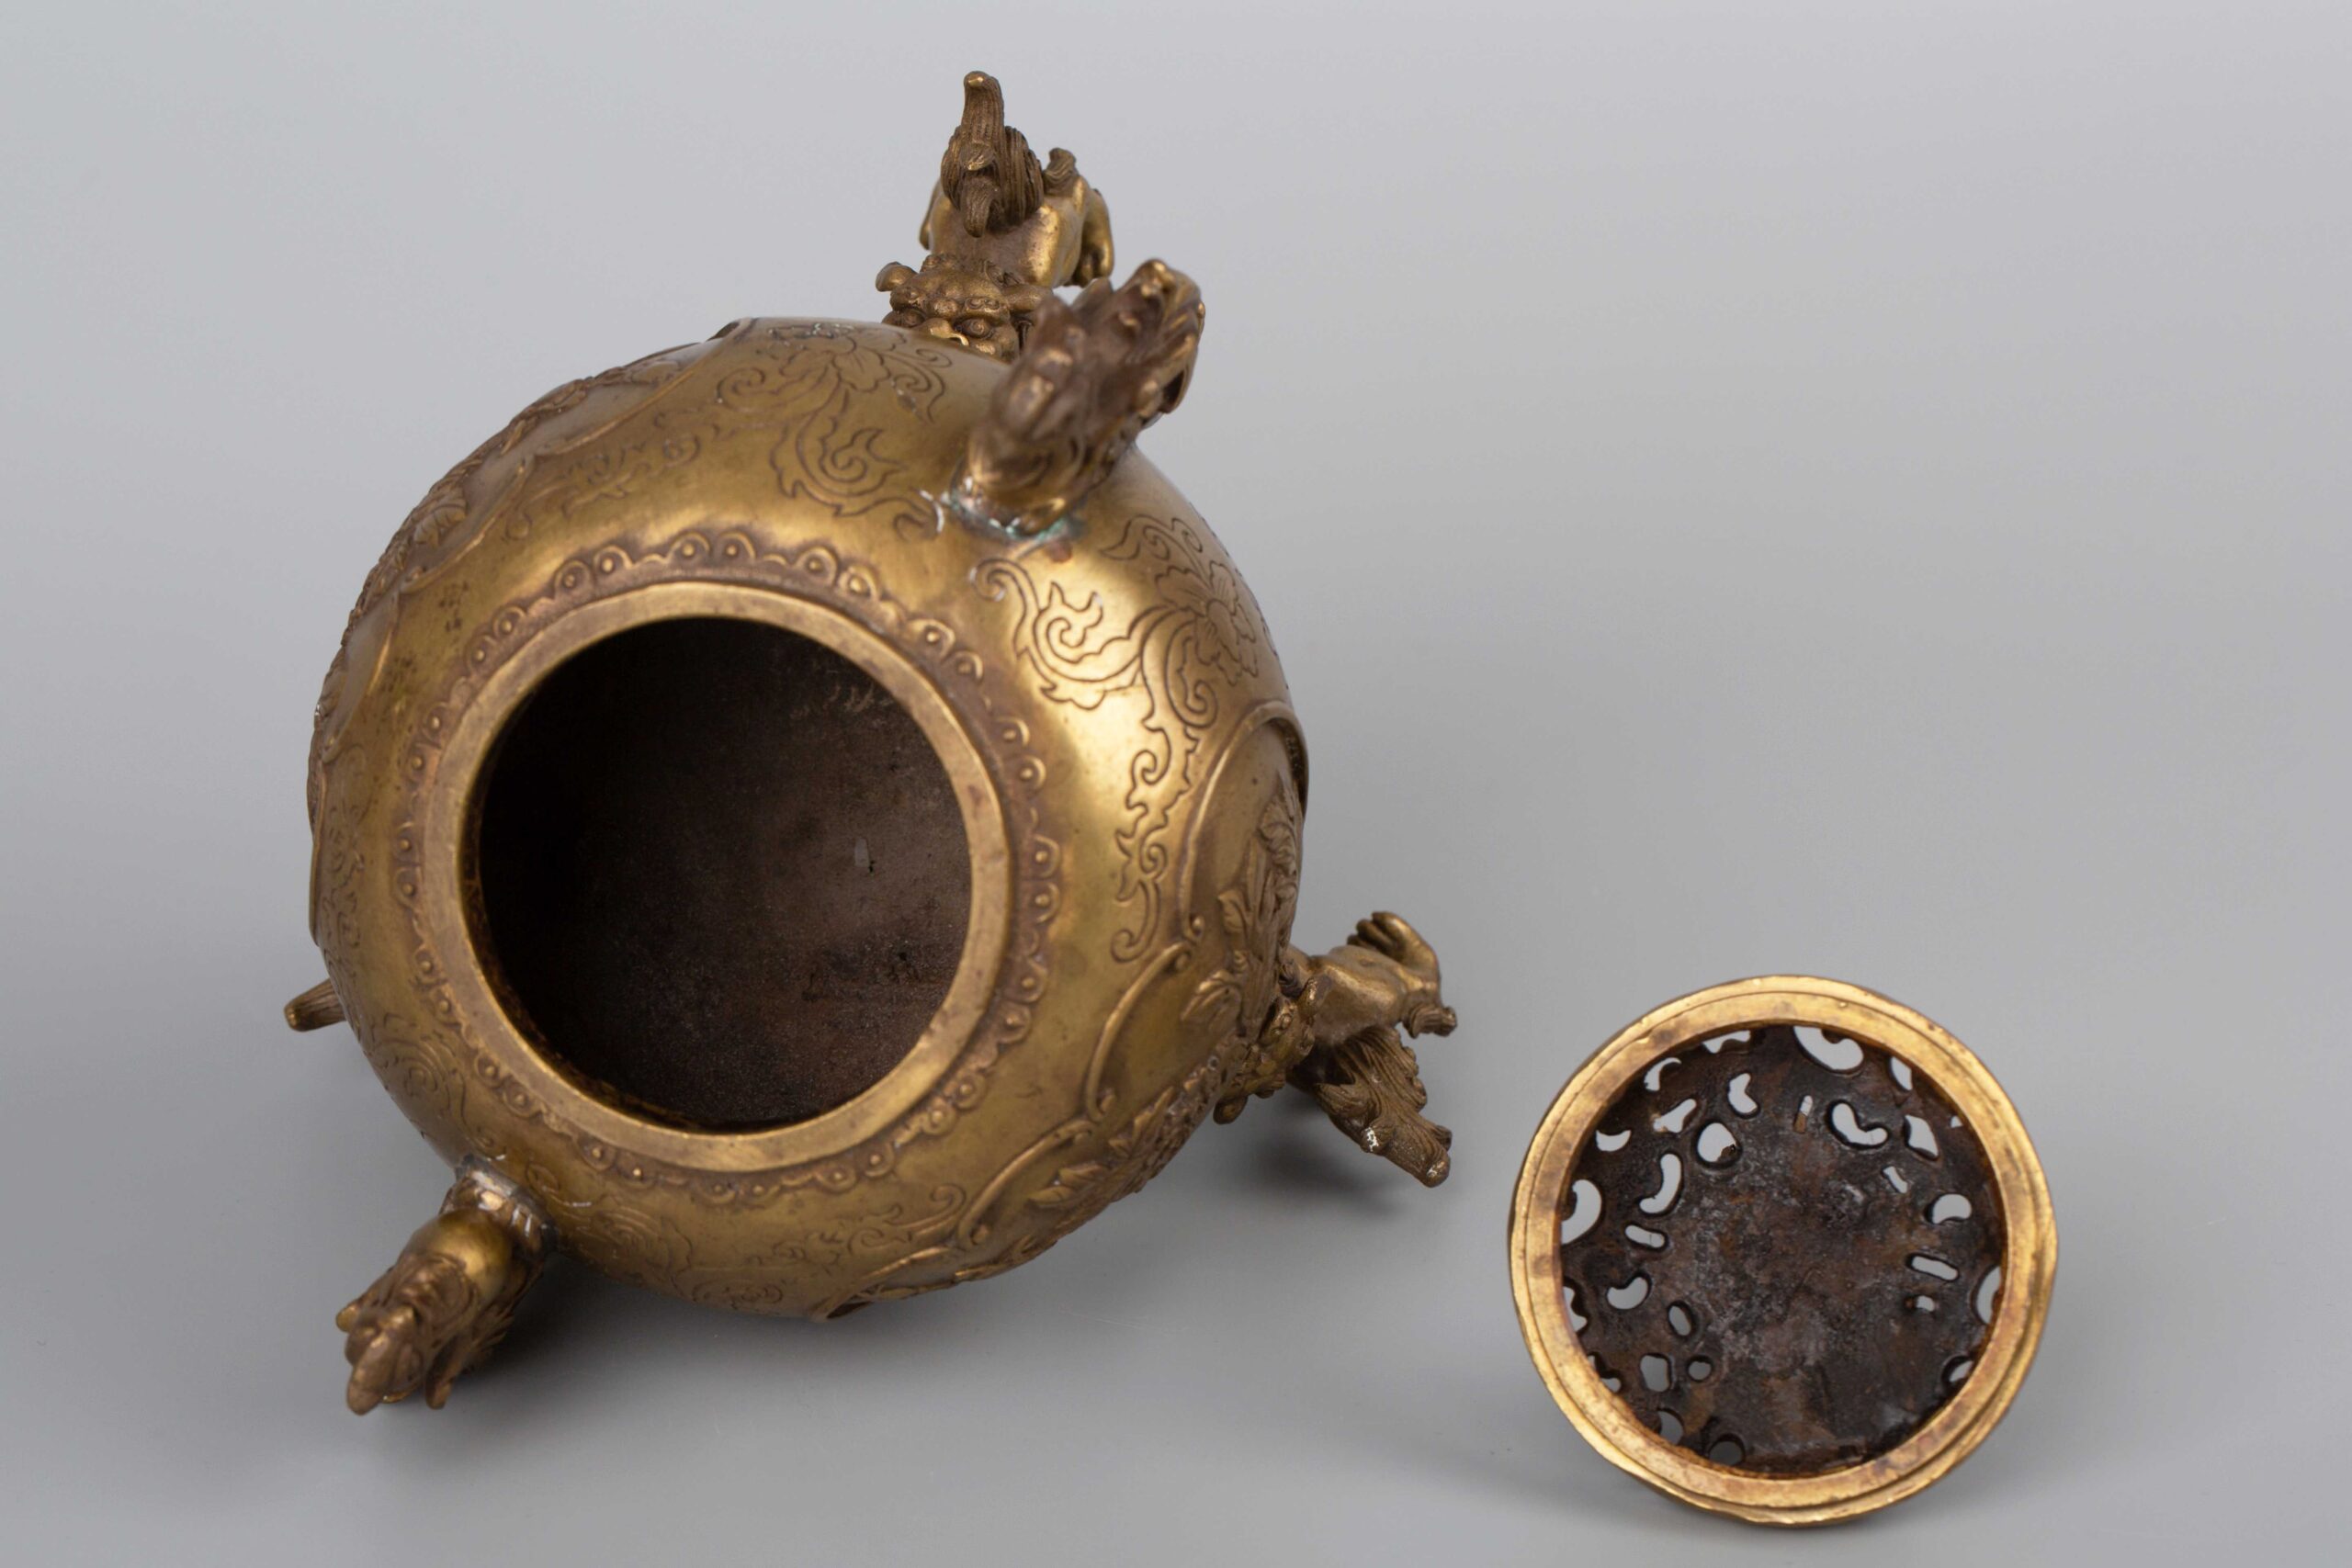 Copper incense burner with Xiangshi mark, late Qing Dynasty